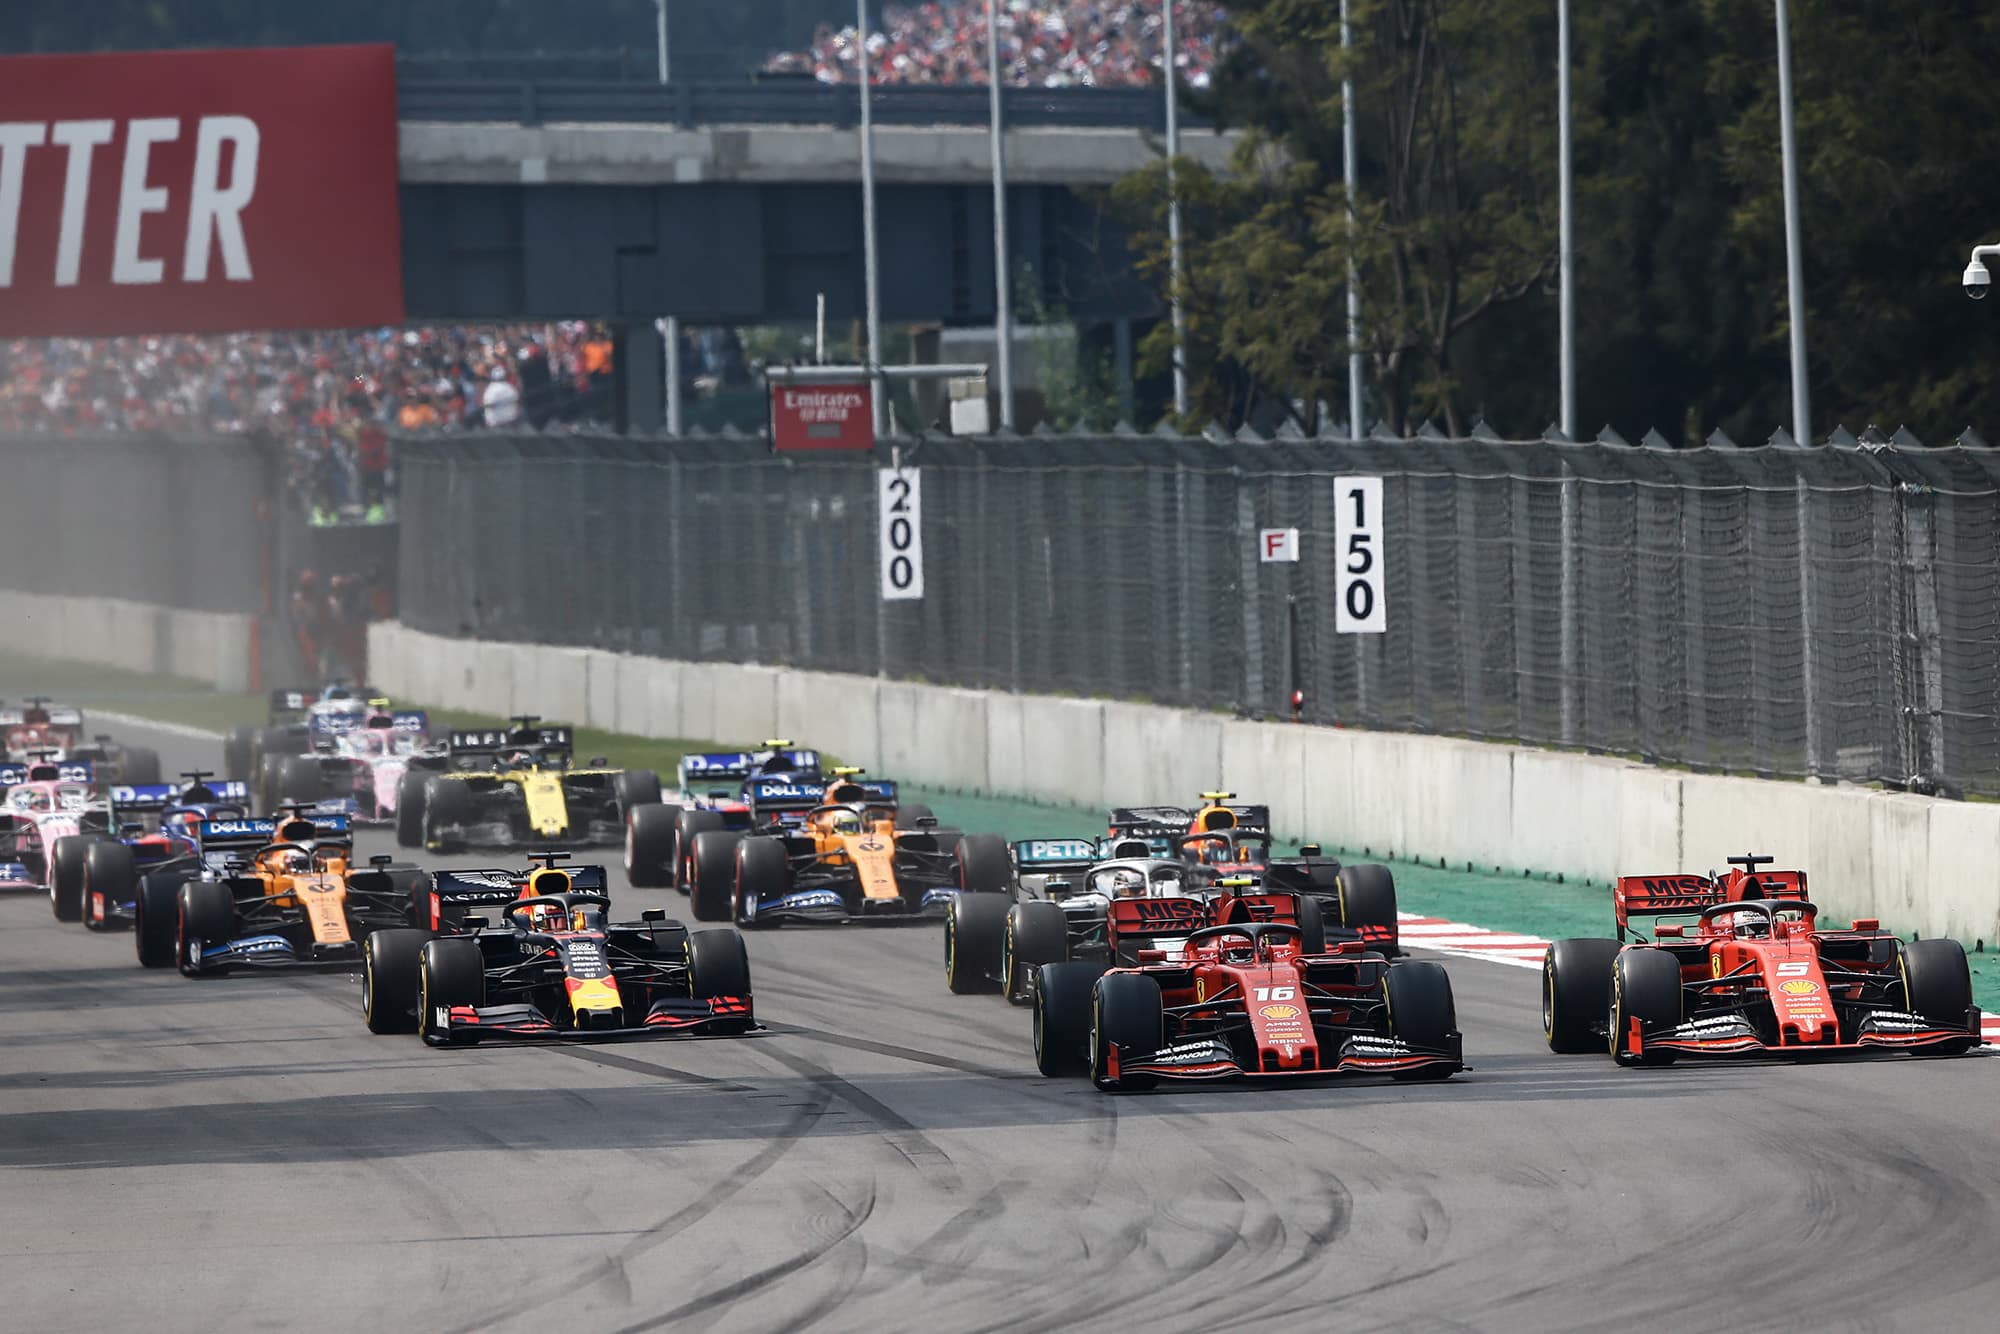 Two Ferraris at the front of the grid as the 2019 F1 Mexican Grand Prix starts